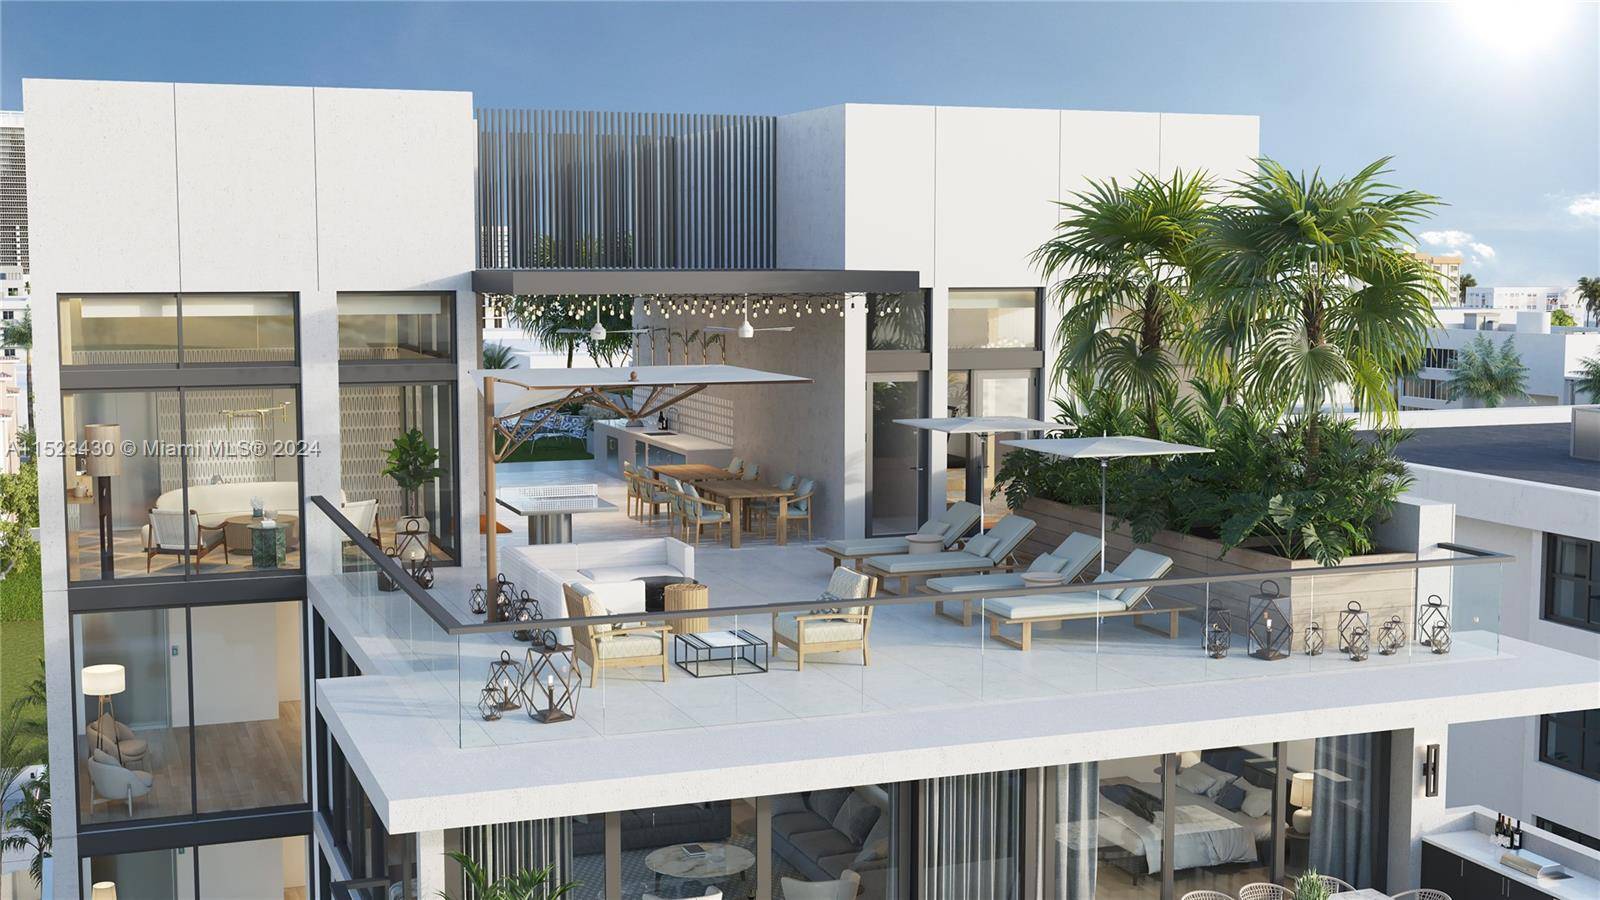 Offering over 6, 400 Total SqFt, The Sunset Penthouse at AIRE Residences offers an unrivaled indoor outdoor lifestyle in the heart of Bay Harbor Islands, Miami.